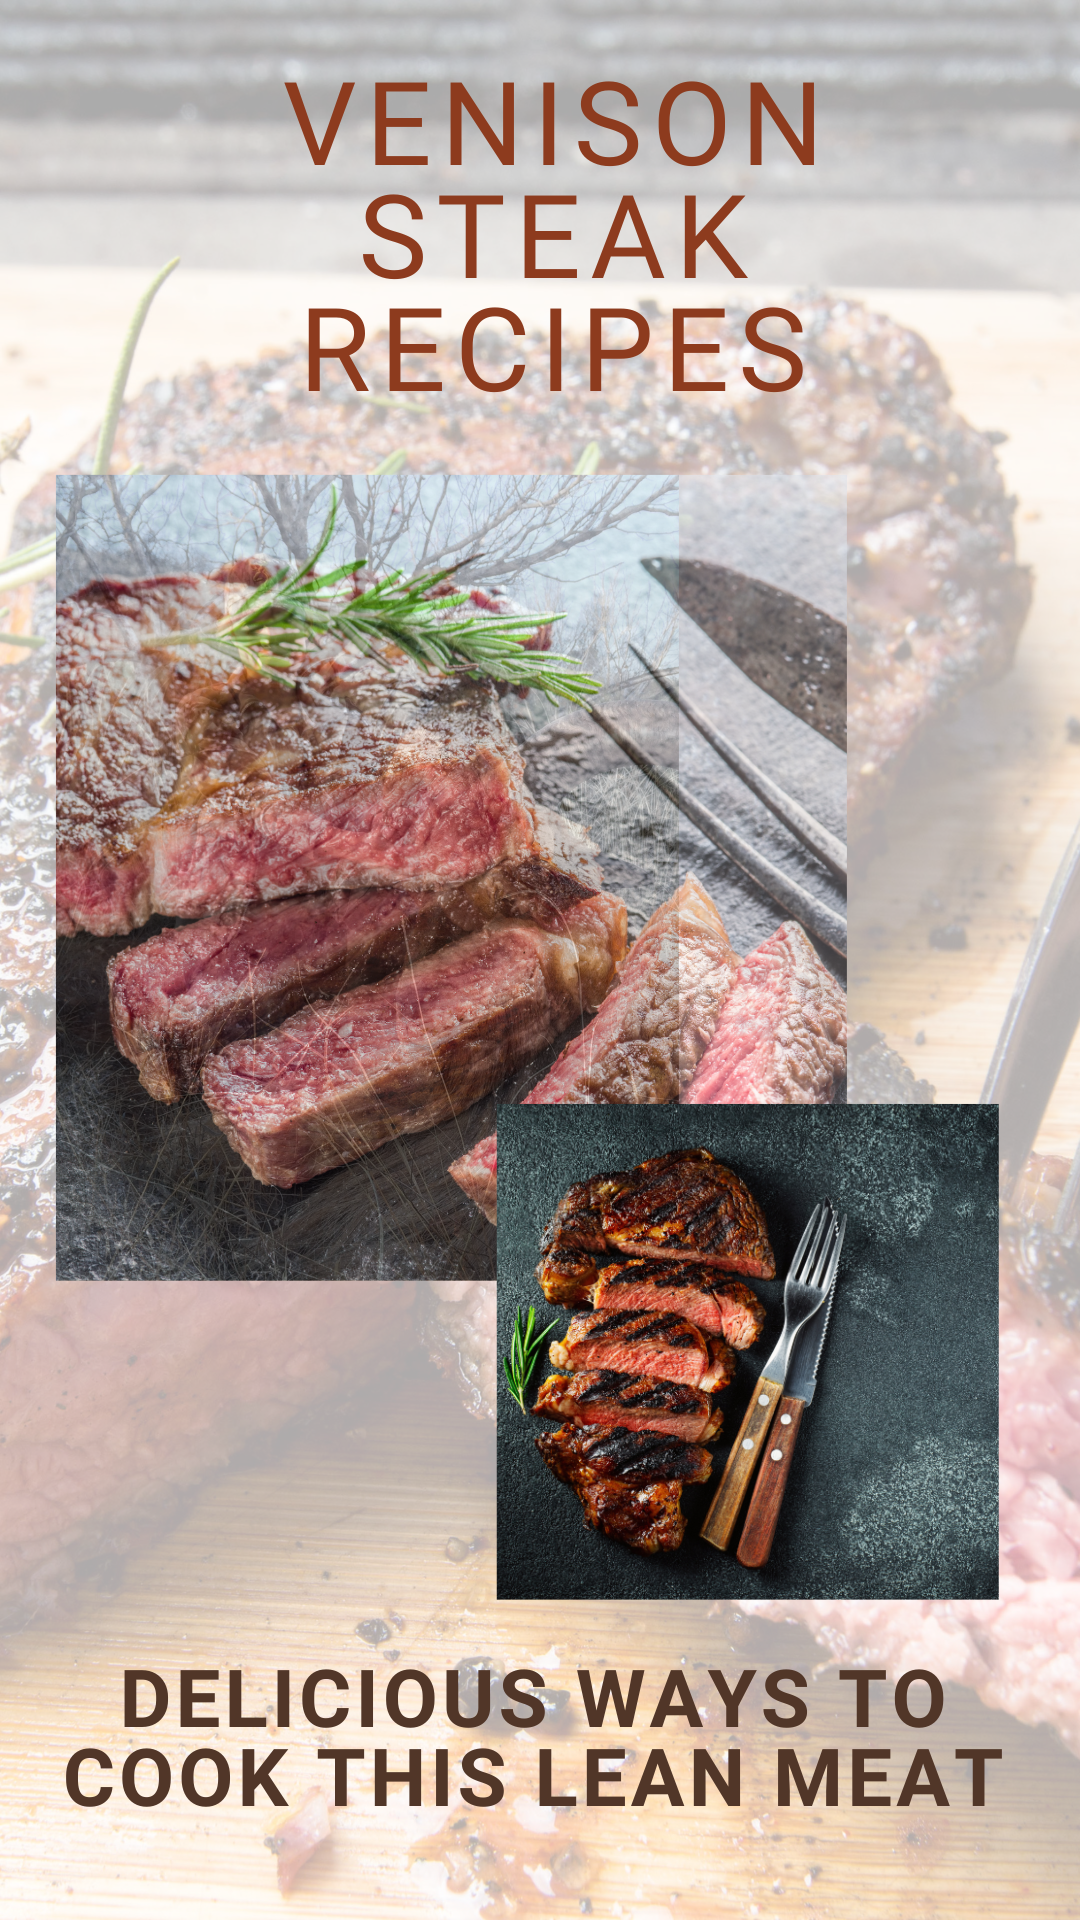 Venison Steak Recipes: Delicious Ways to Cook This Lean Meat